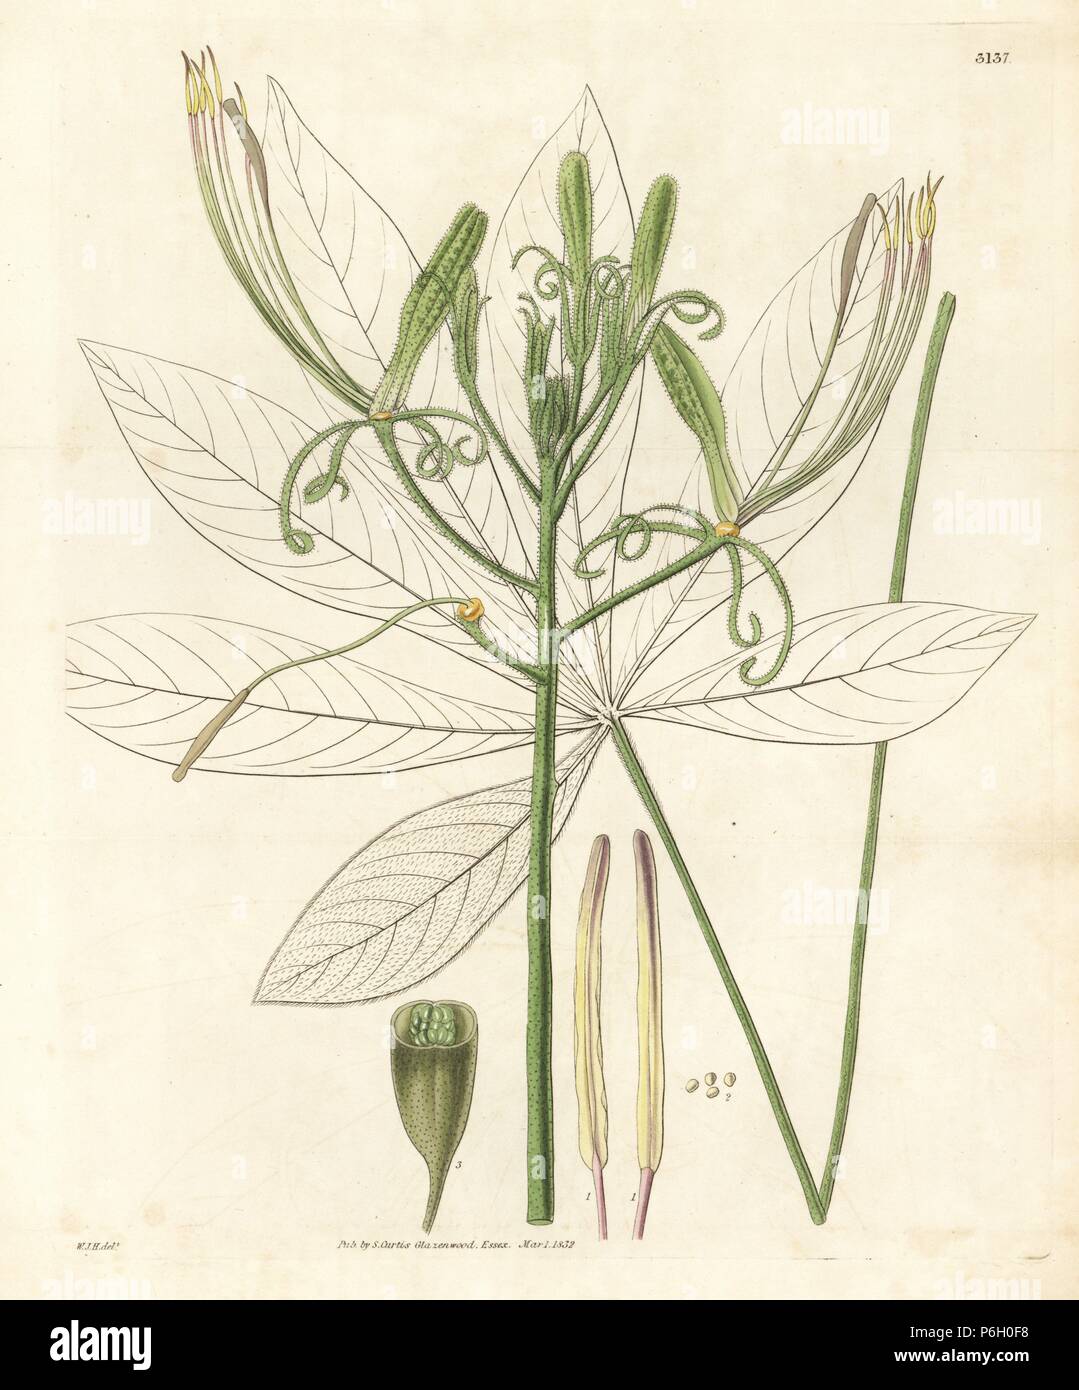 Gigantic cleome, Cleome viridiflora (Cleome gigantea). Handcoloured copperplate engraving by Swan after an illustration by William Jackson Hooker from Samuel Curtis' 'Botanical Magazine,' London, 1832. Stock Photo